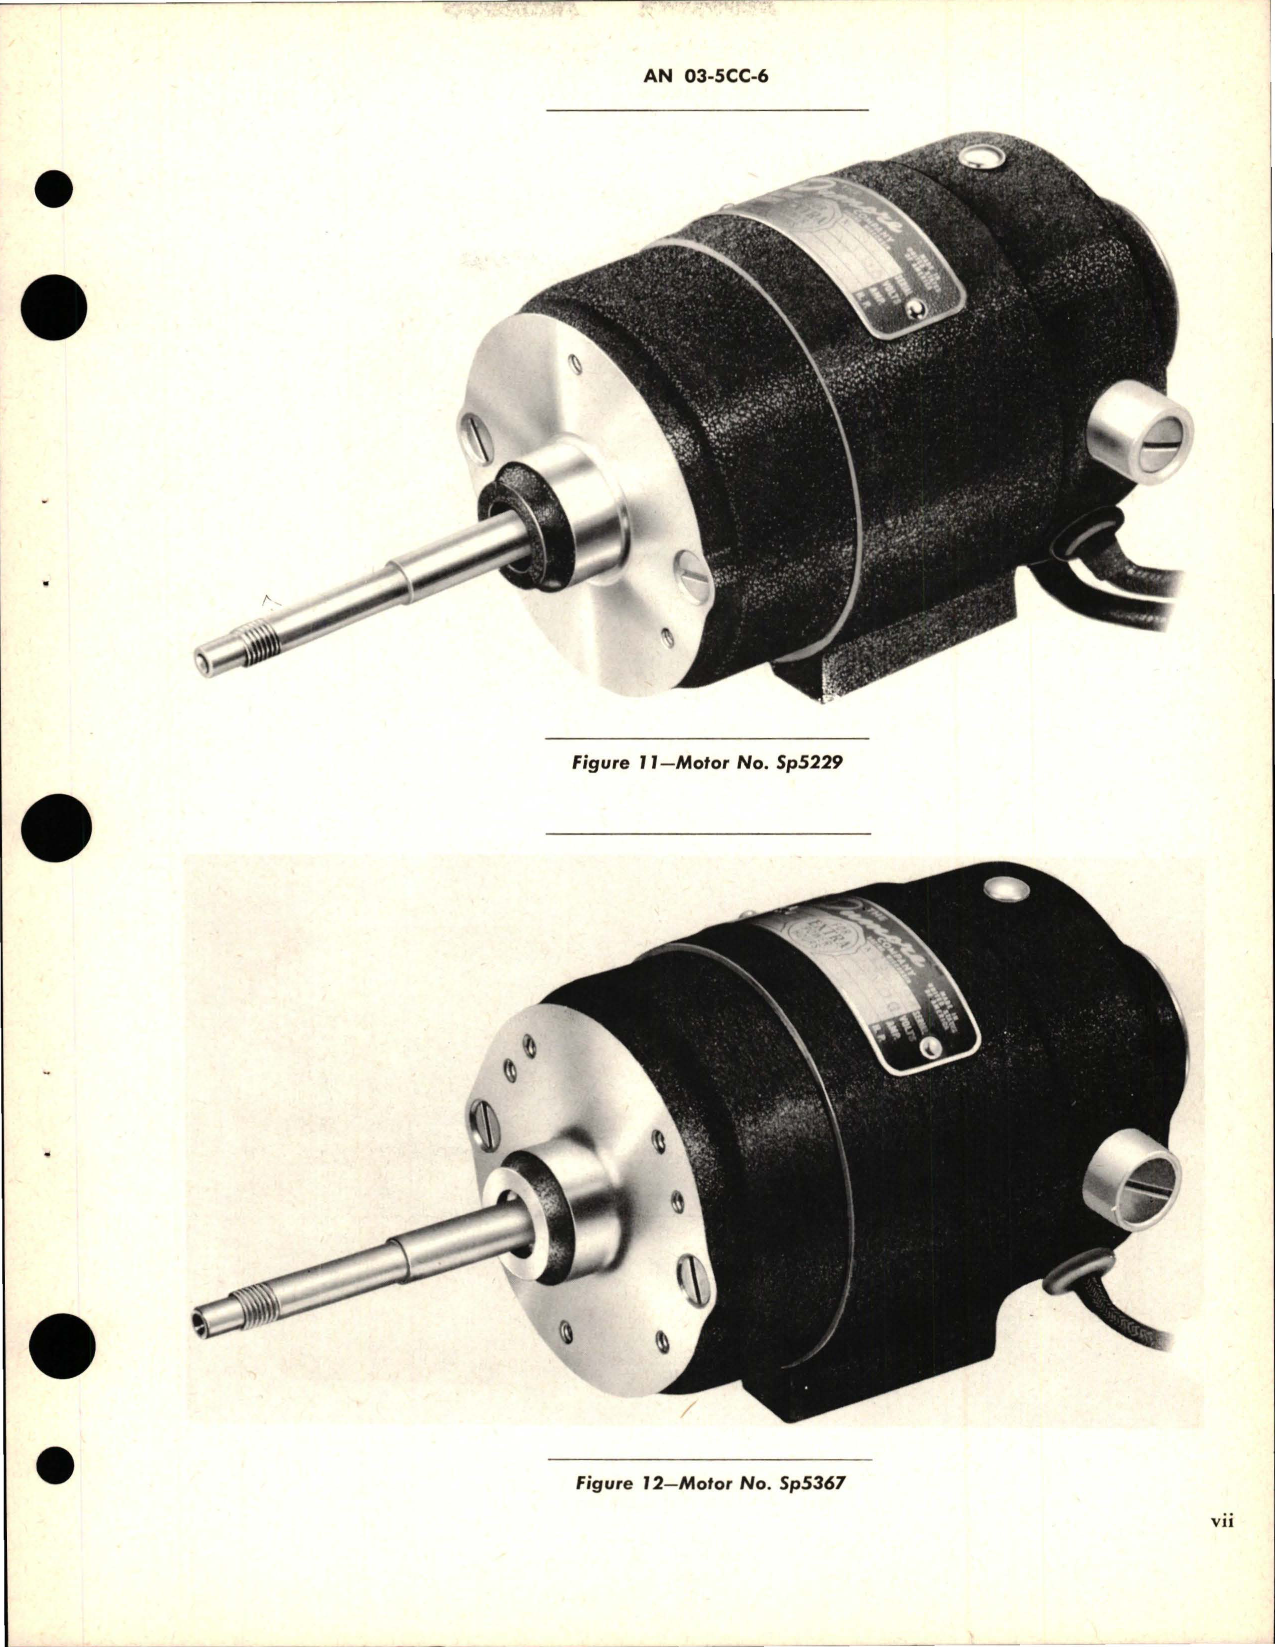 Sample page 9 from AirCorps Library document: Operation, Service, and Overhaul Instructions with Parts Catalog for Fractional Horsepower Electric Motors